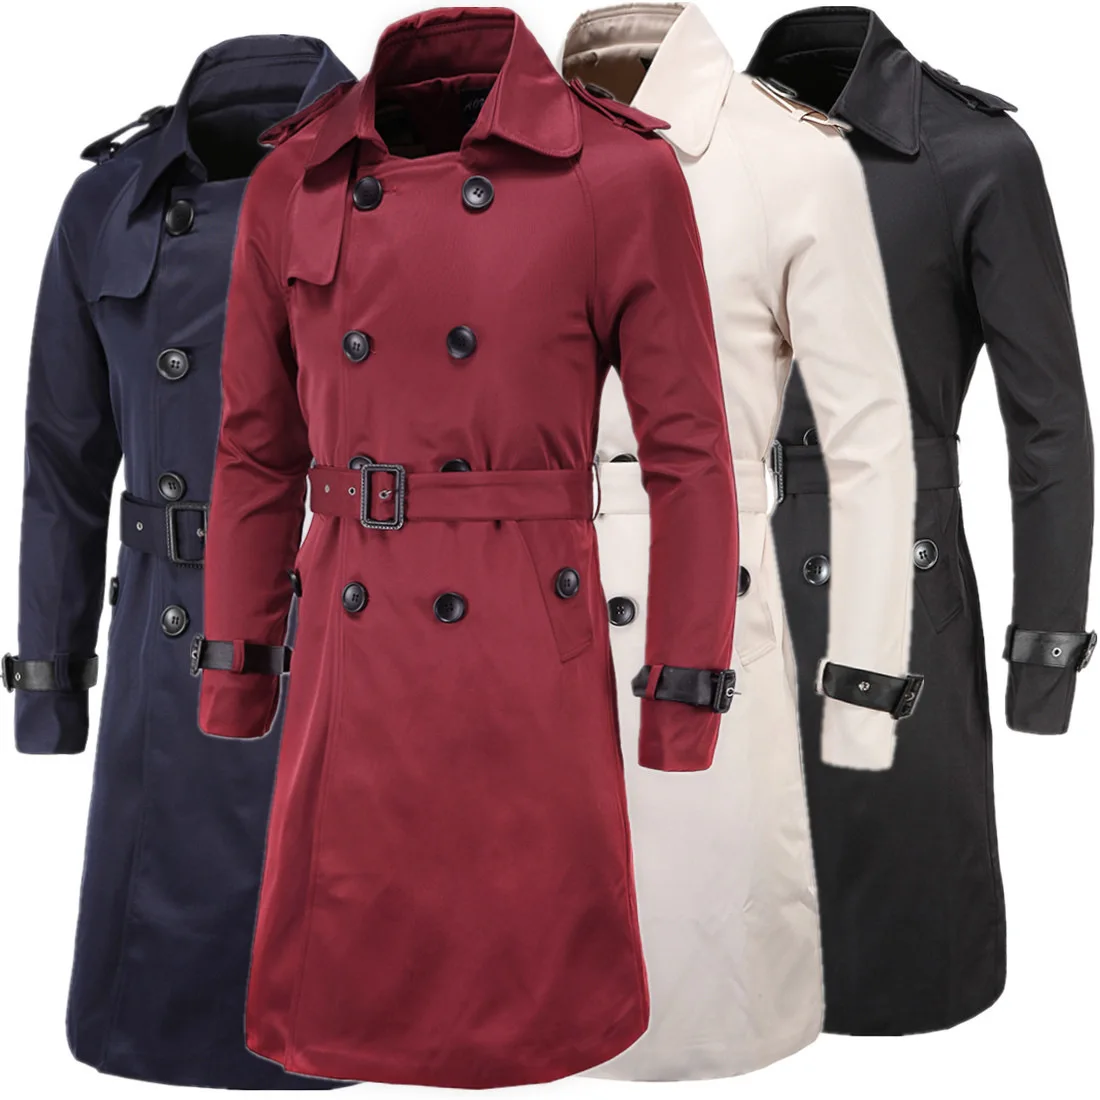 New Men's Wear 2022 Autumn Fashion Boutique Europe and America Long Slim Double breasted Trench Coat for Men